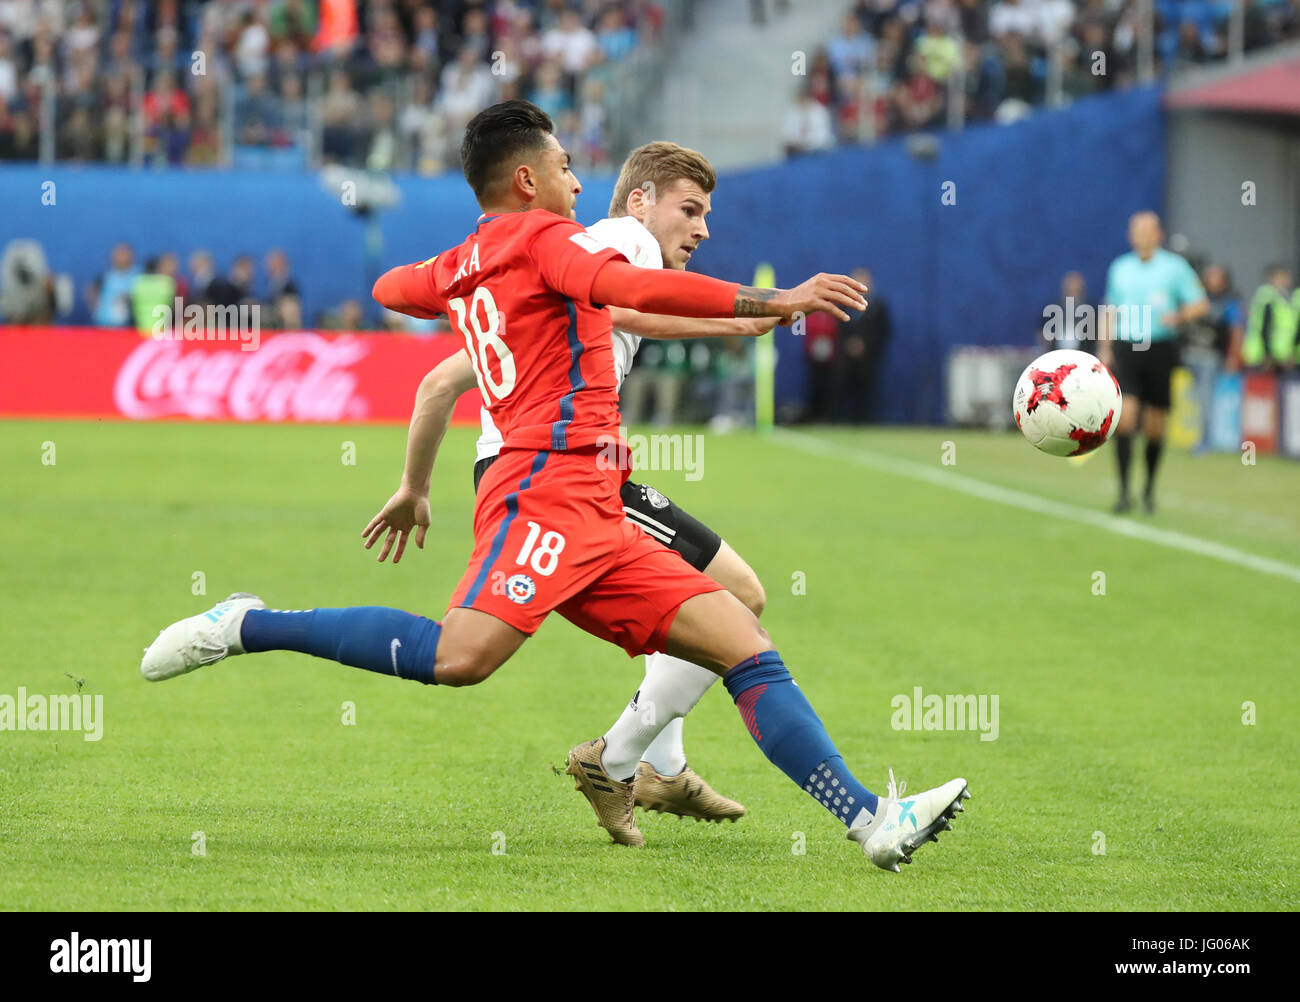 St. Petersburg, Russia. 2nd July, 2017. Jara Gonzalo (L) of Chile competes during the final match between Chile and Germany at the 2017 FIFA Confederations Cup in St. Petersburg, Russia, on July 2, 2017. Germany claimed the title by defeating Chile with 1-0. Credit: Xu Zijian/Xinhua/Alamy Live News Stock Photo